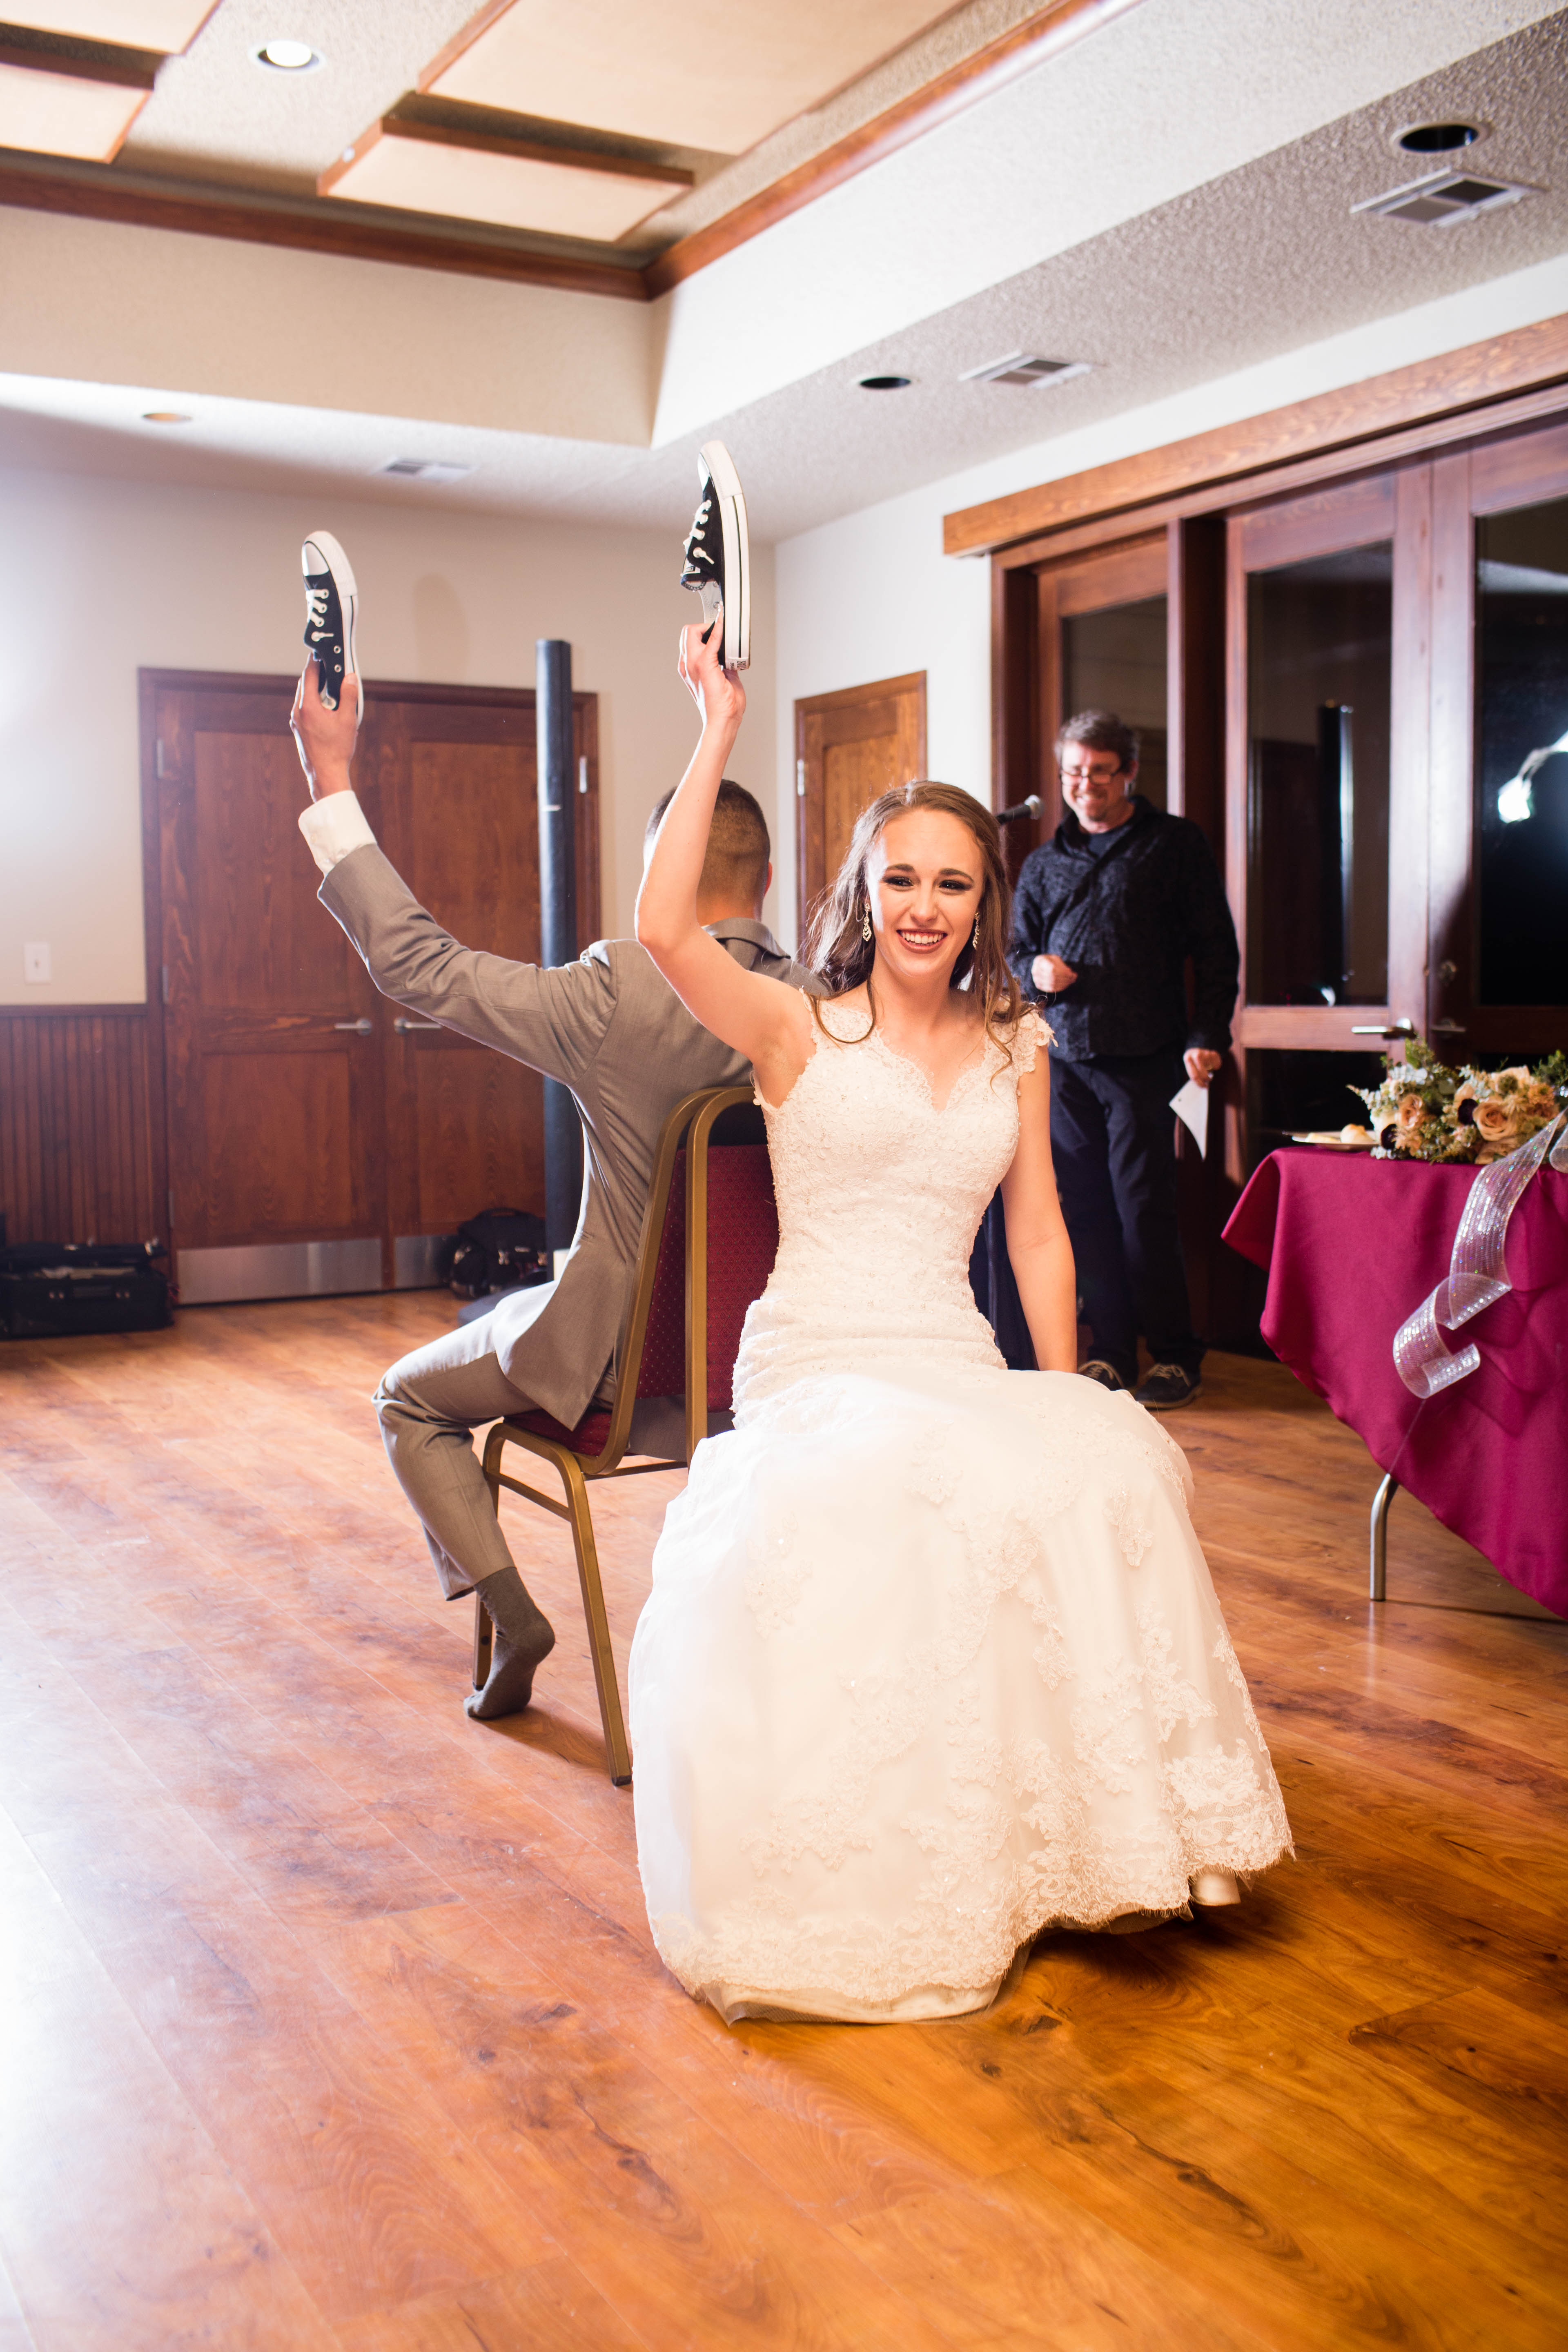 bride smiles during the Newlywed Game at reception